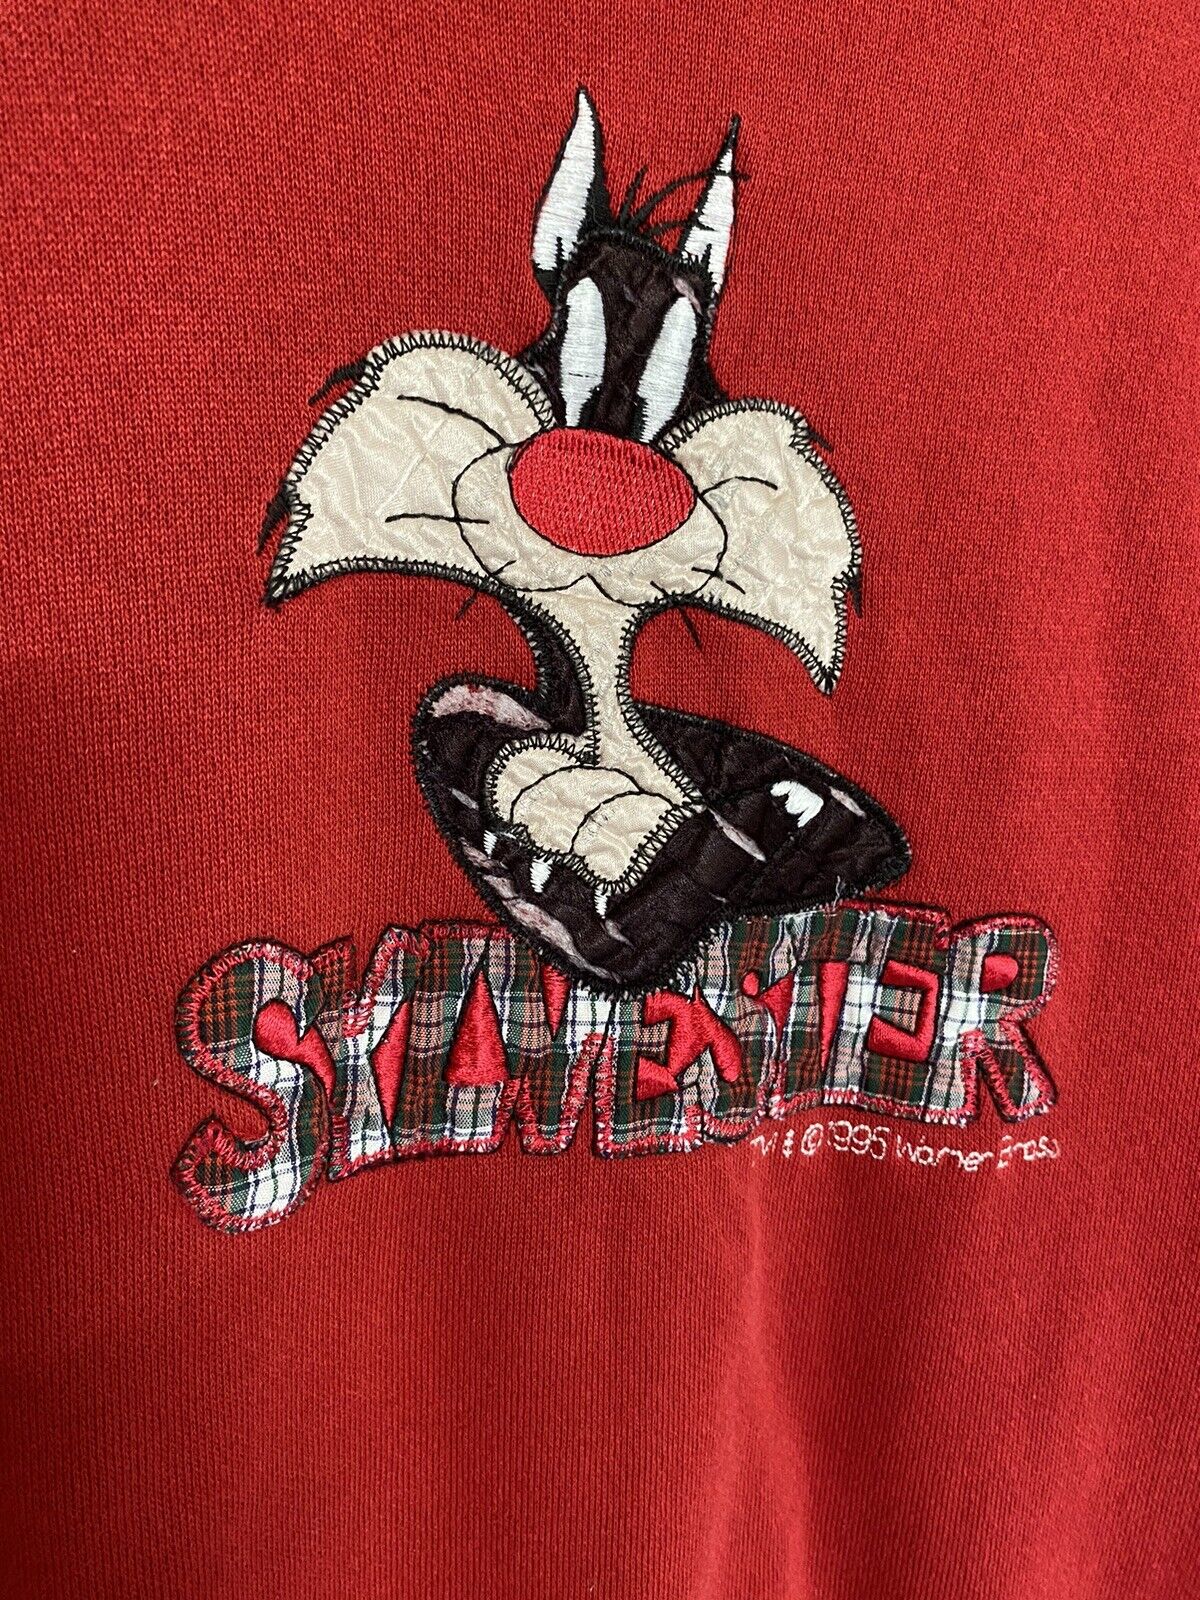 1995 Vintage Looney Tunes Sylvester Sweatshirt Shirt Embroidery Red Cat Kitty